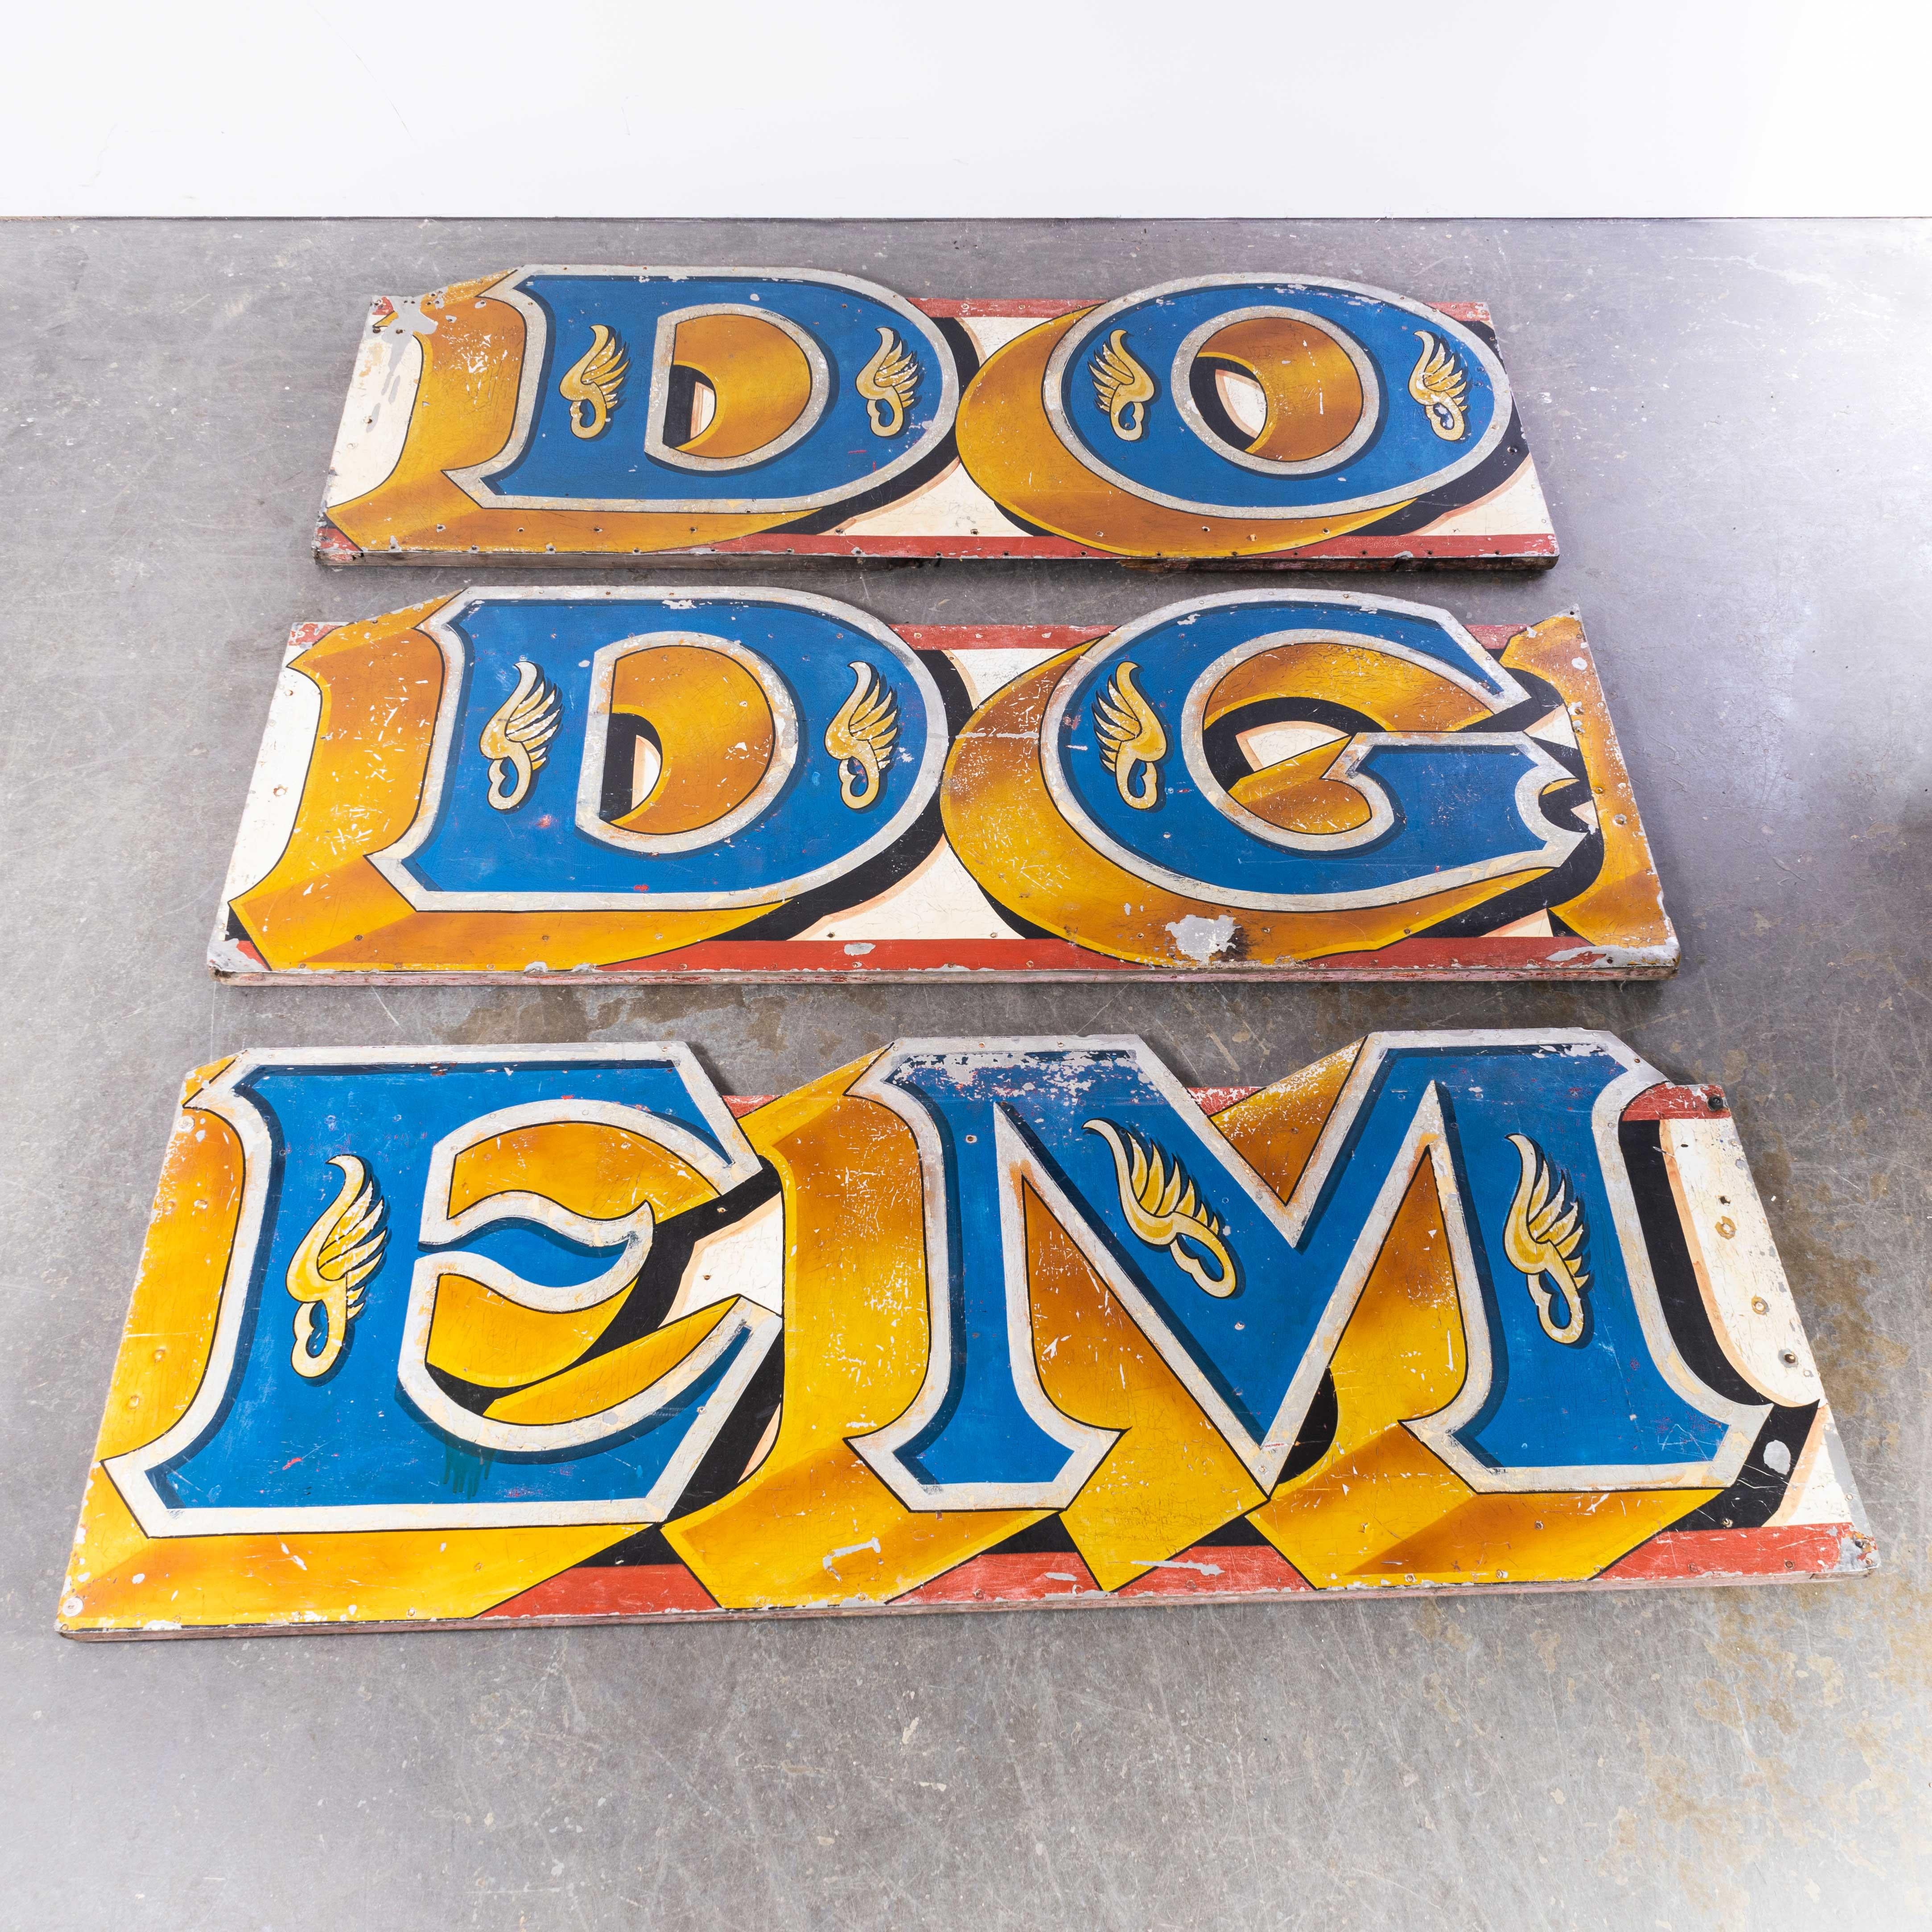 1950s Huge Original hand painted Dodgems Sign – Seven Metres
1950s Huge Original Hand painted Dodgems Sign – Seven Metres. One of the most extraordinary things we have bought. At just over seven metres in length (7.2m) the sign is split into three